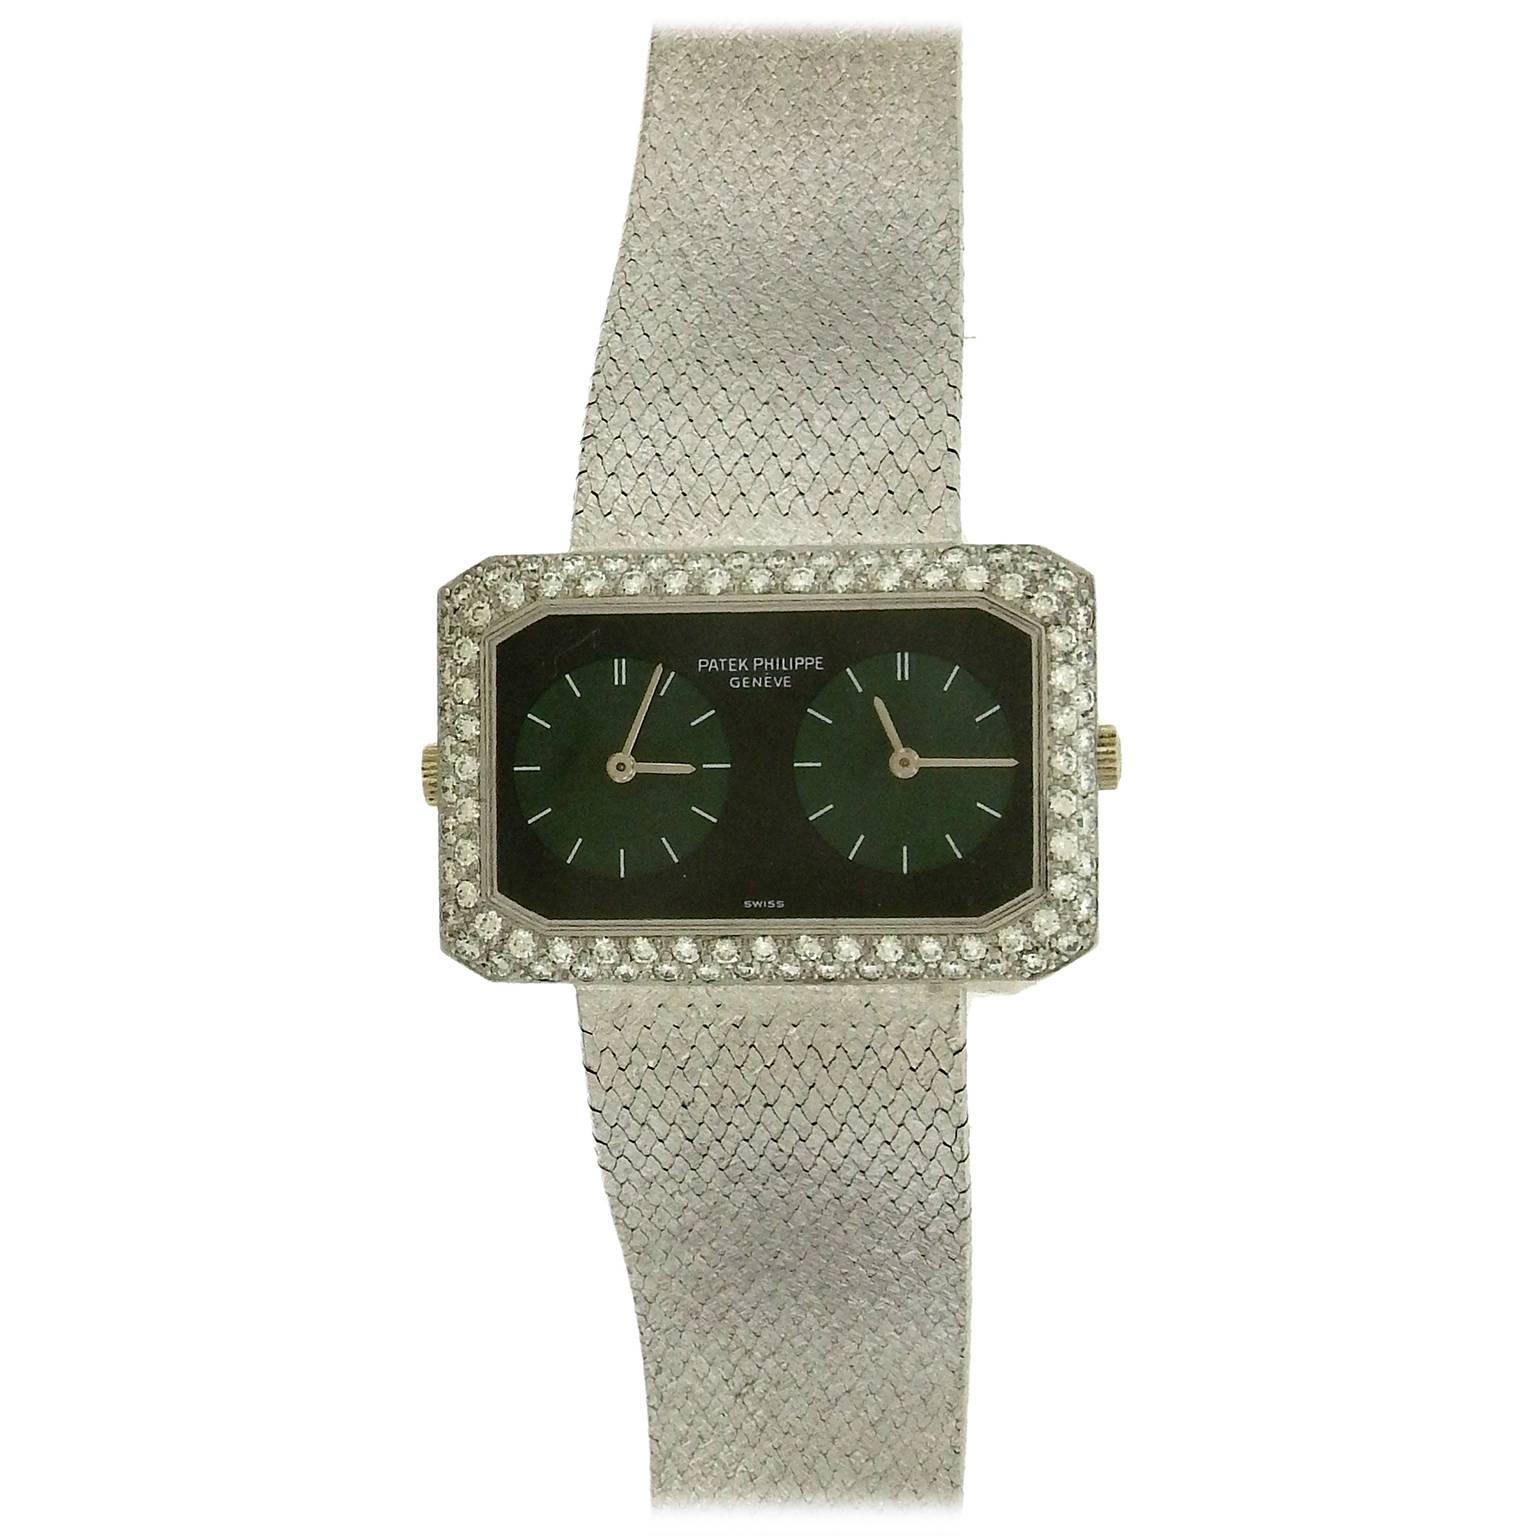 Rare and distinctive, 18K white gold, diamond, jade and onyx, Patek Philippe so-called “Gemini” wristwatch, ref. 4404, circa 1970, is a fine and extremely rare, elongated cut-corner horizontal rectangular two-time zone wristwatch made with two